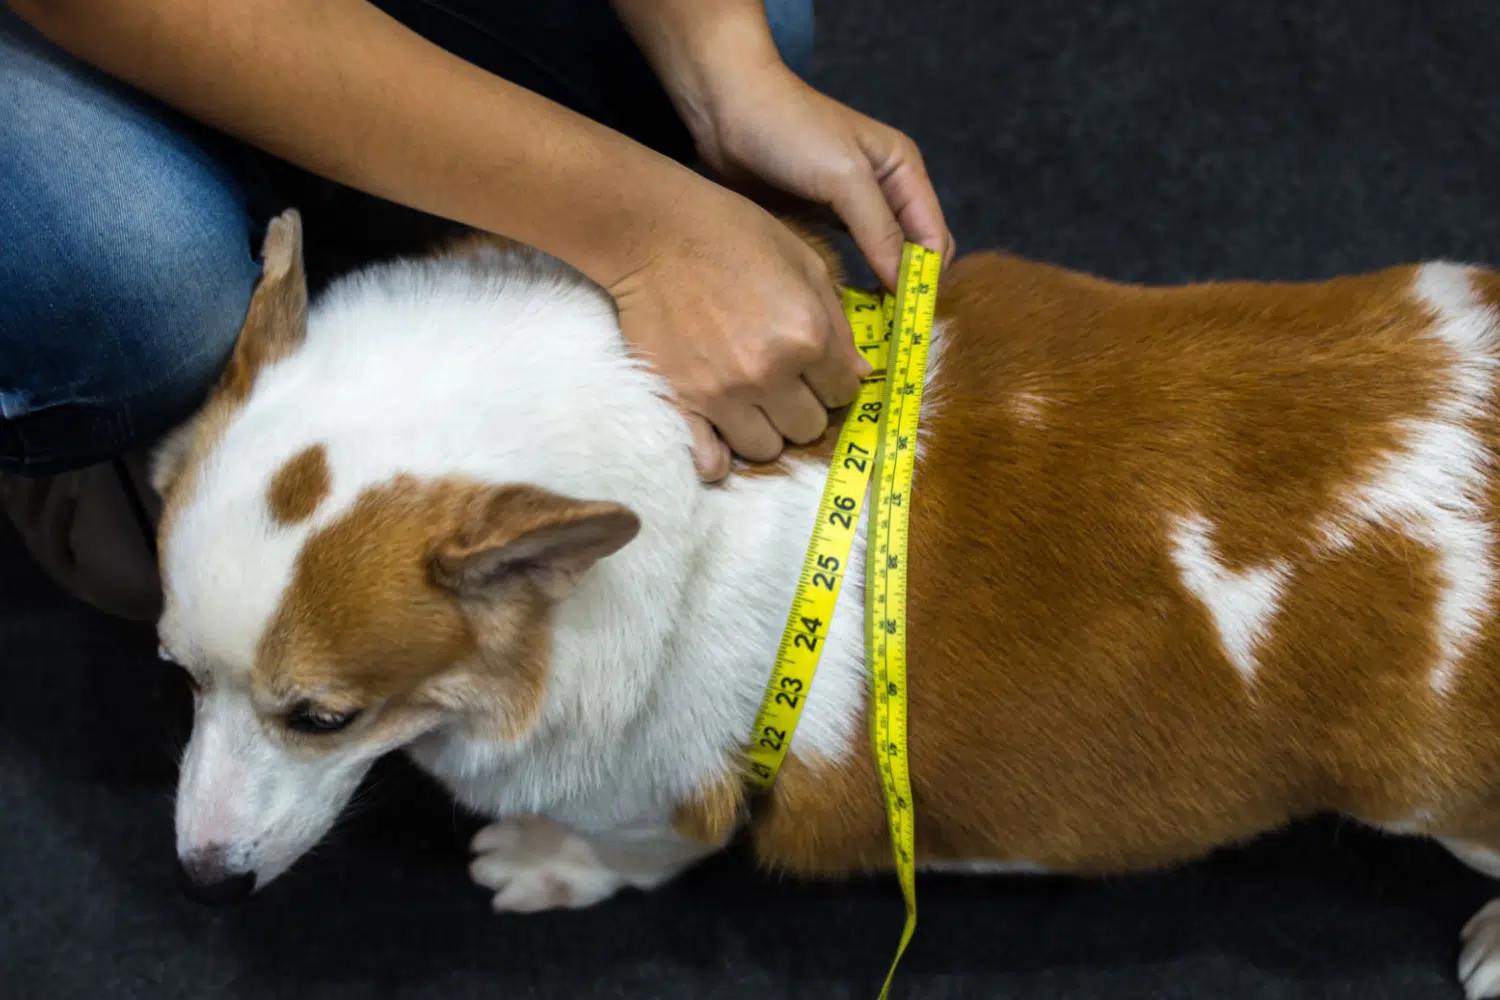 Is Your Overweight Dog Fat-Shaming You? 4 Reasons Why Your Dog Can't Lose Weight